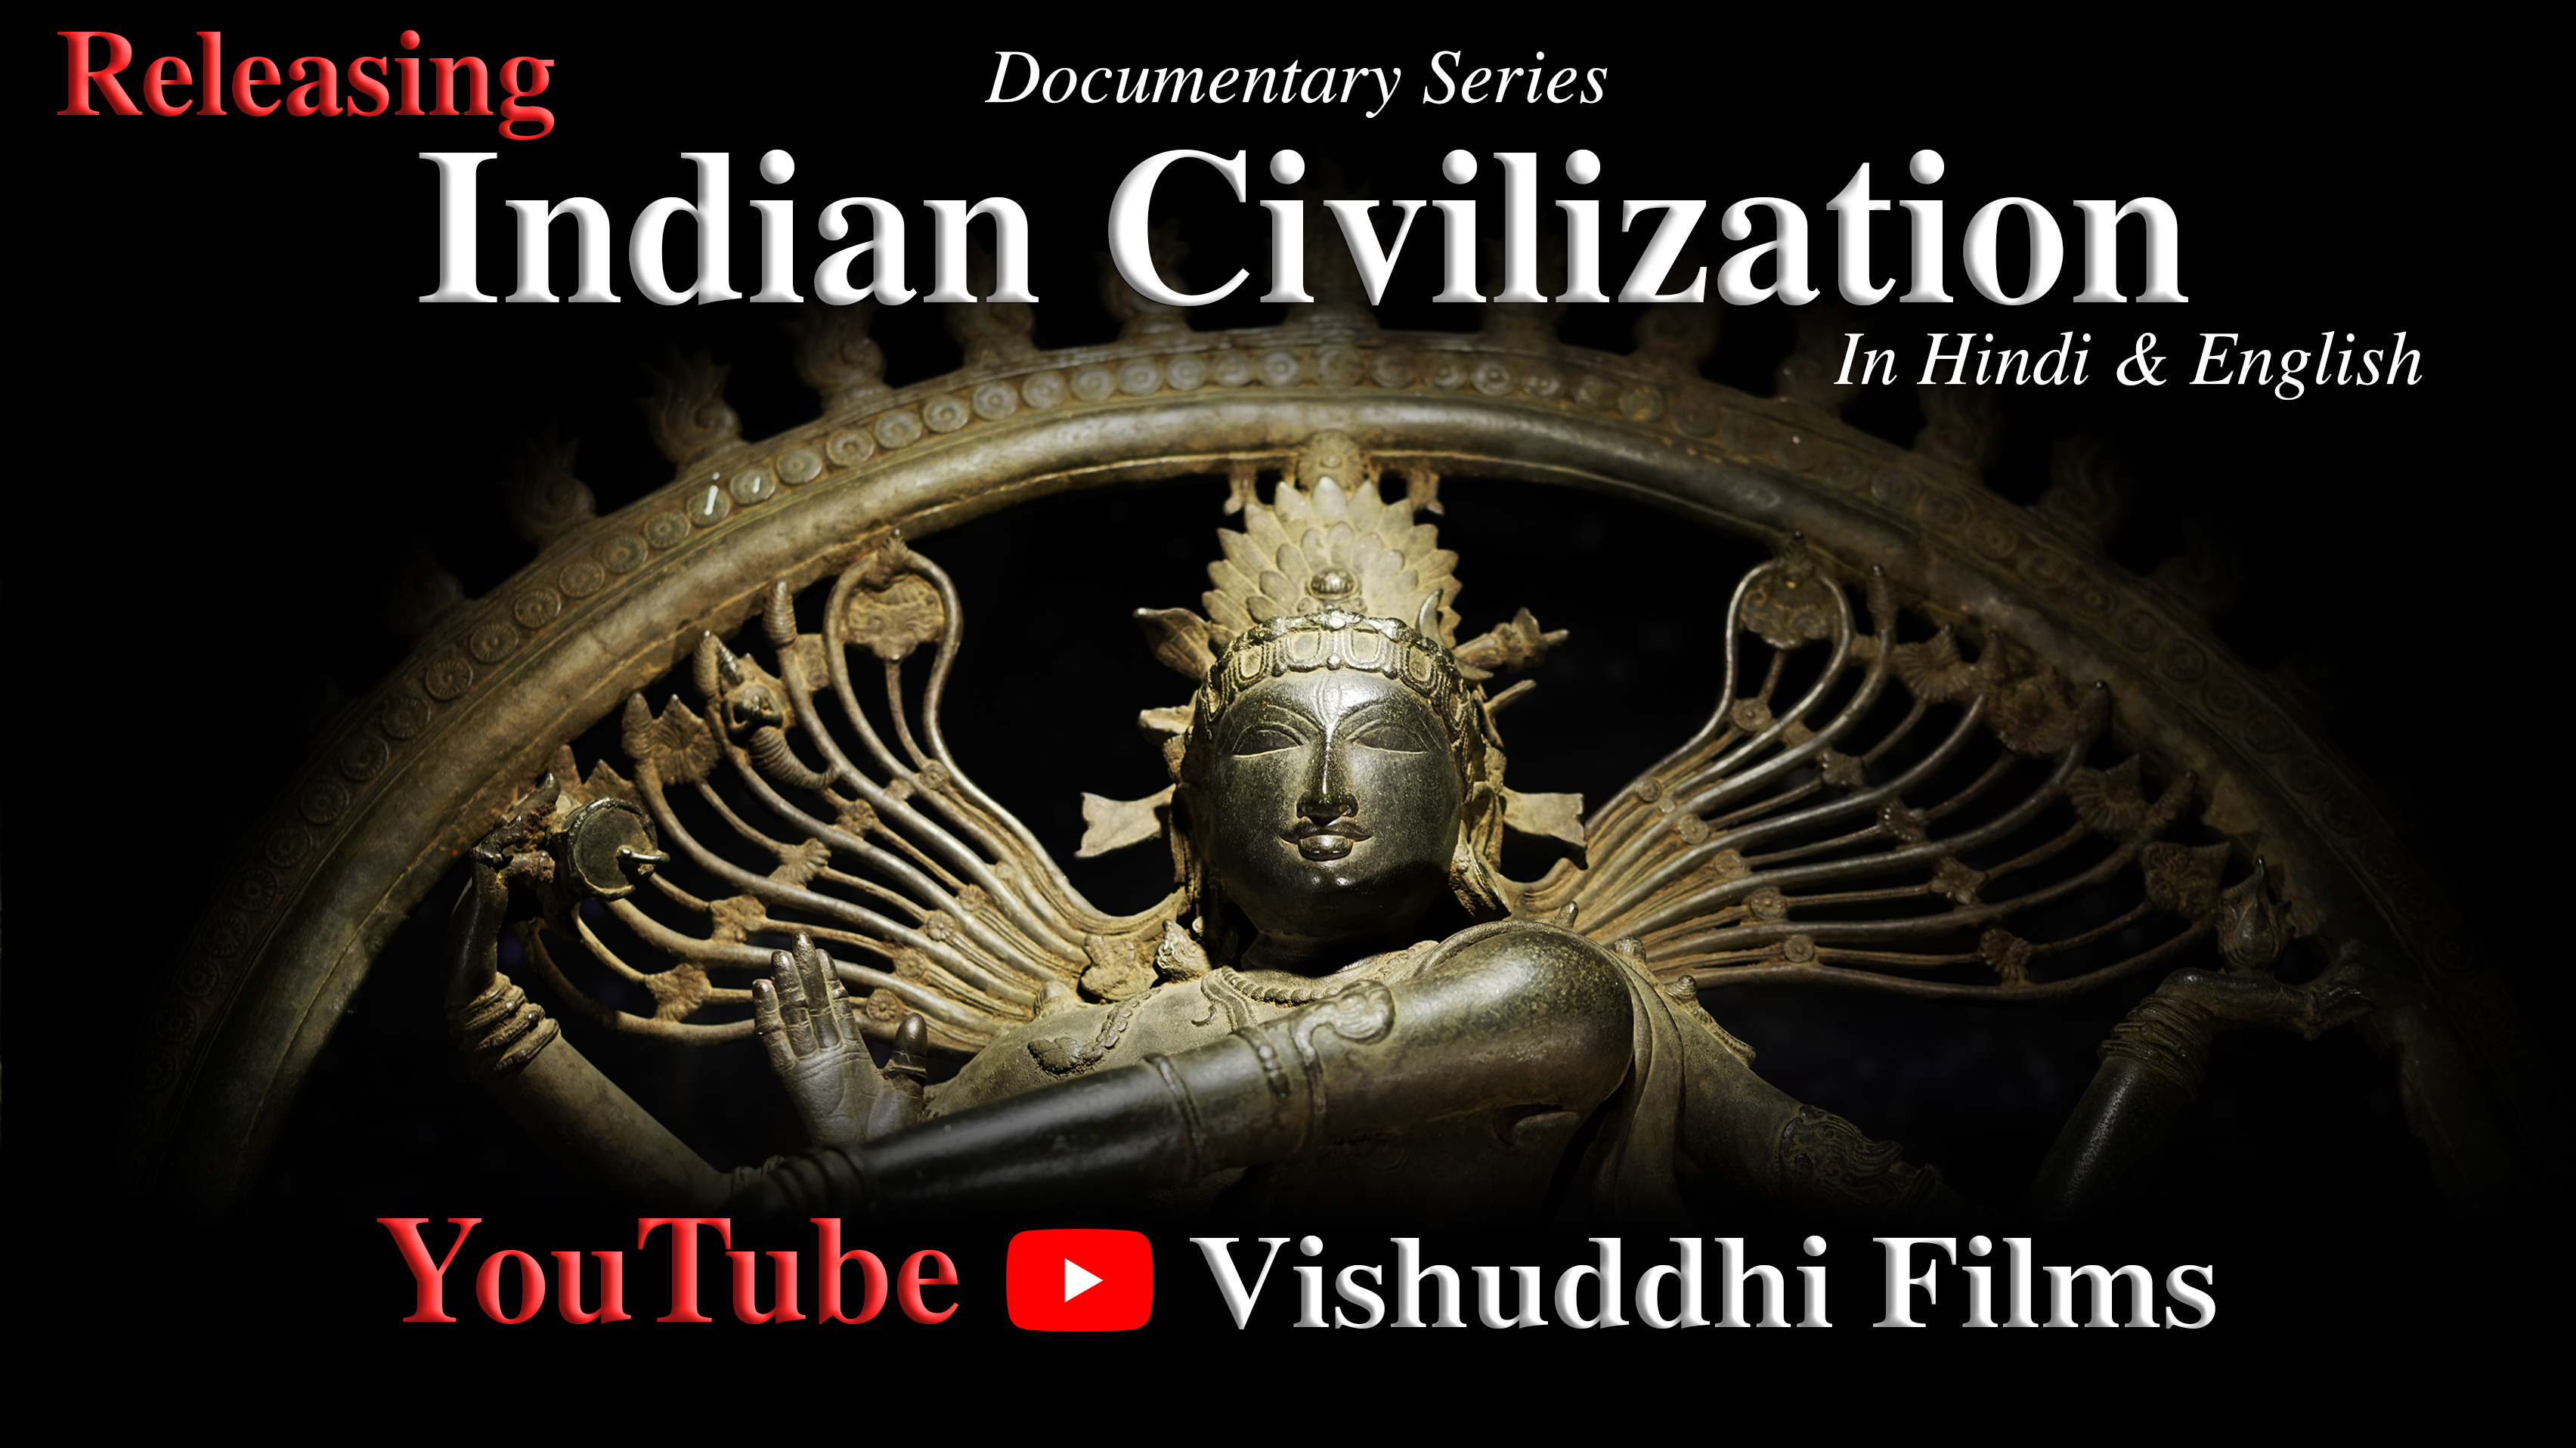 I. Introduction to the Ancient Hindi Civilization